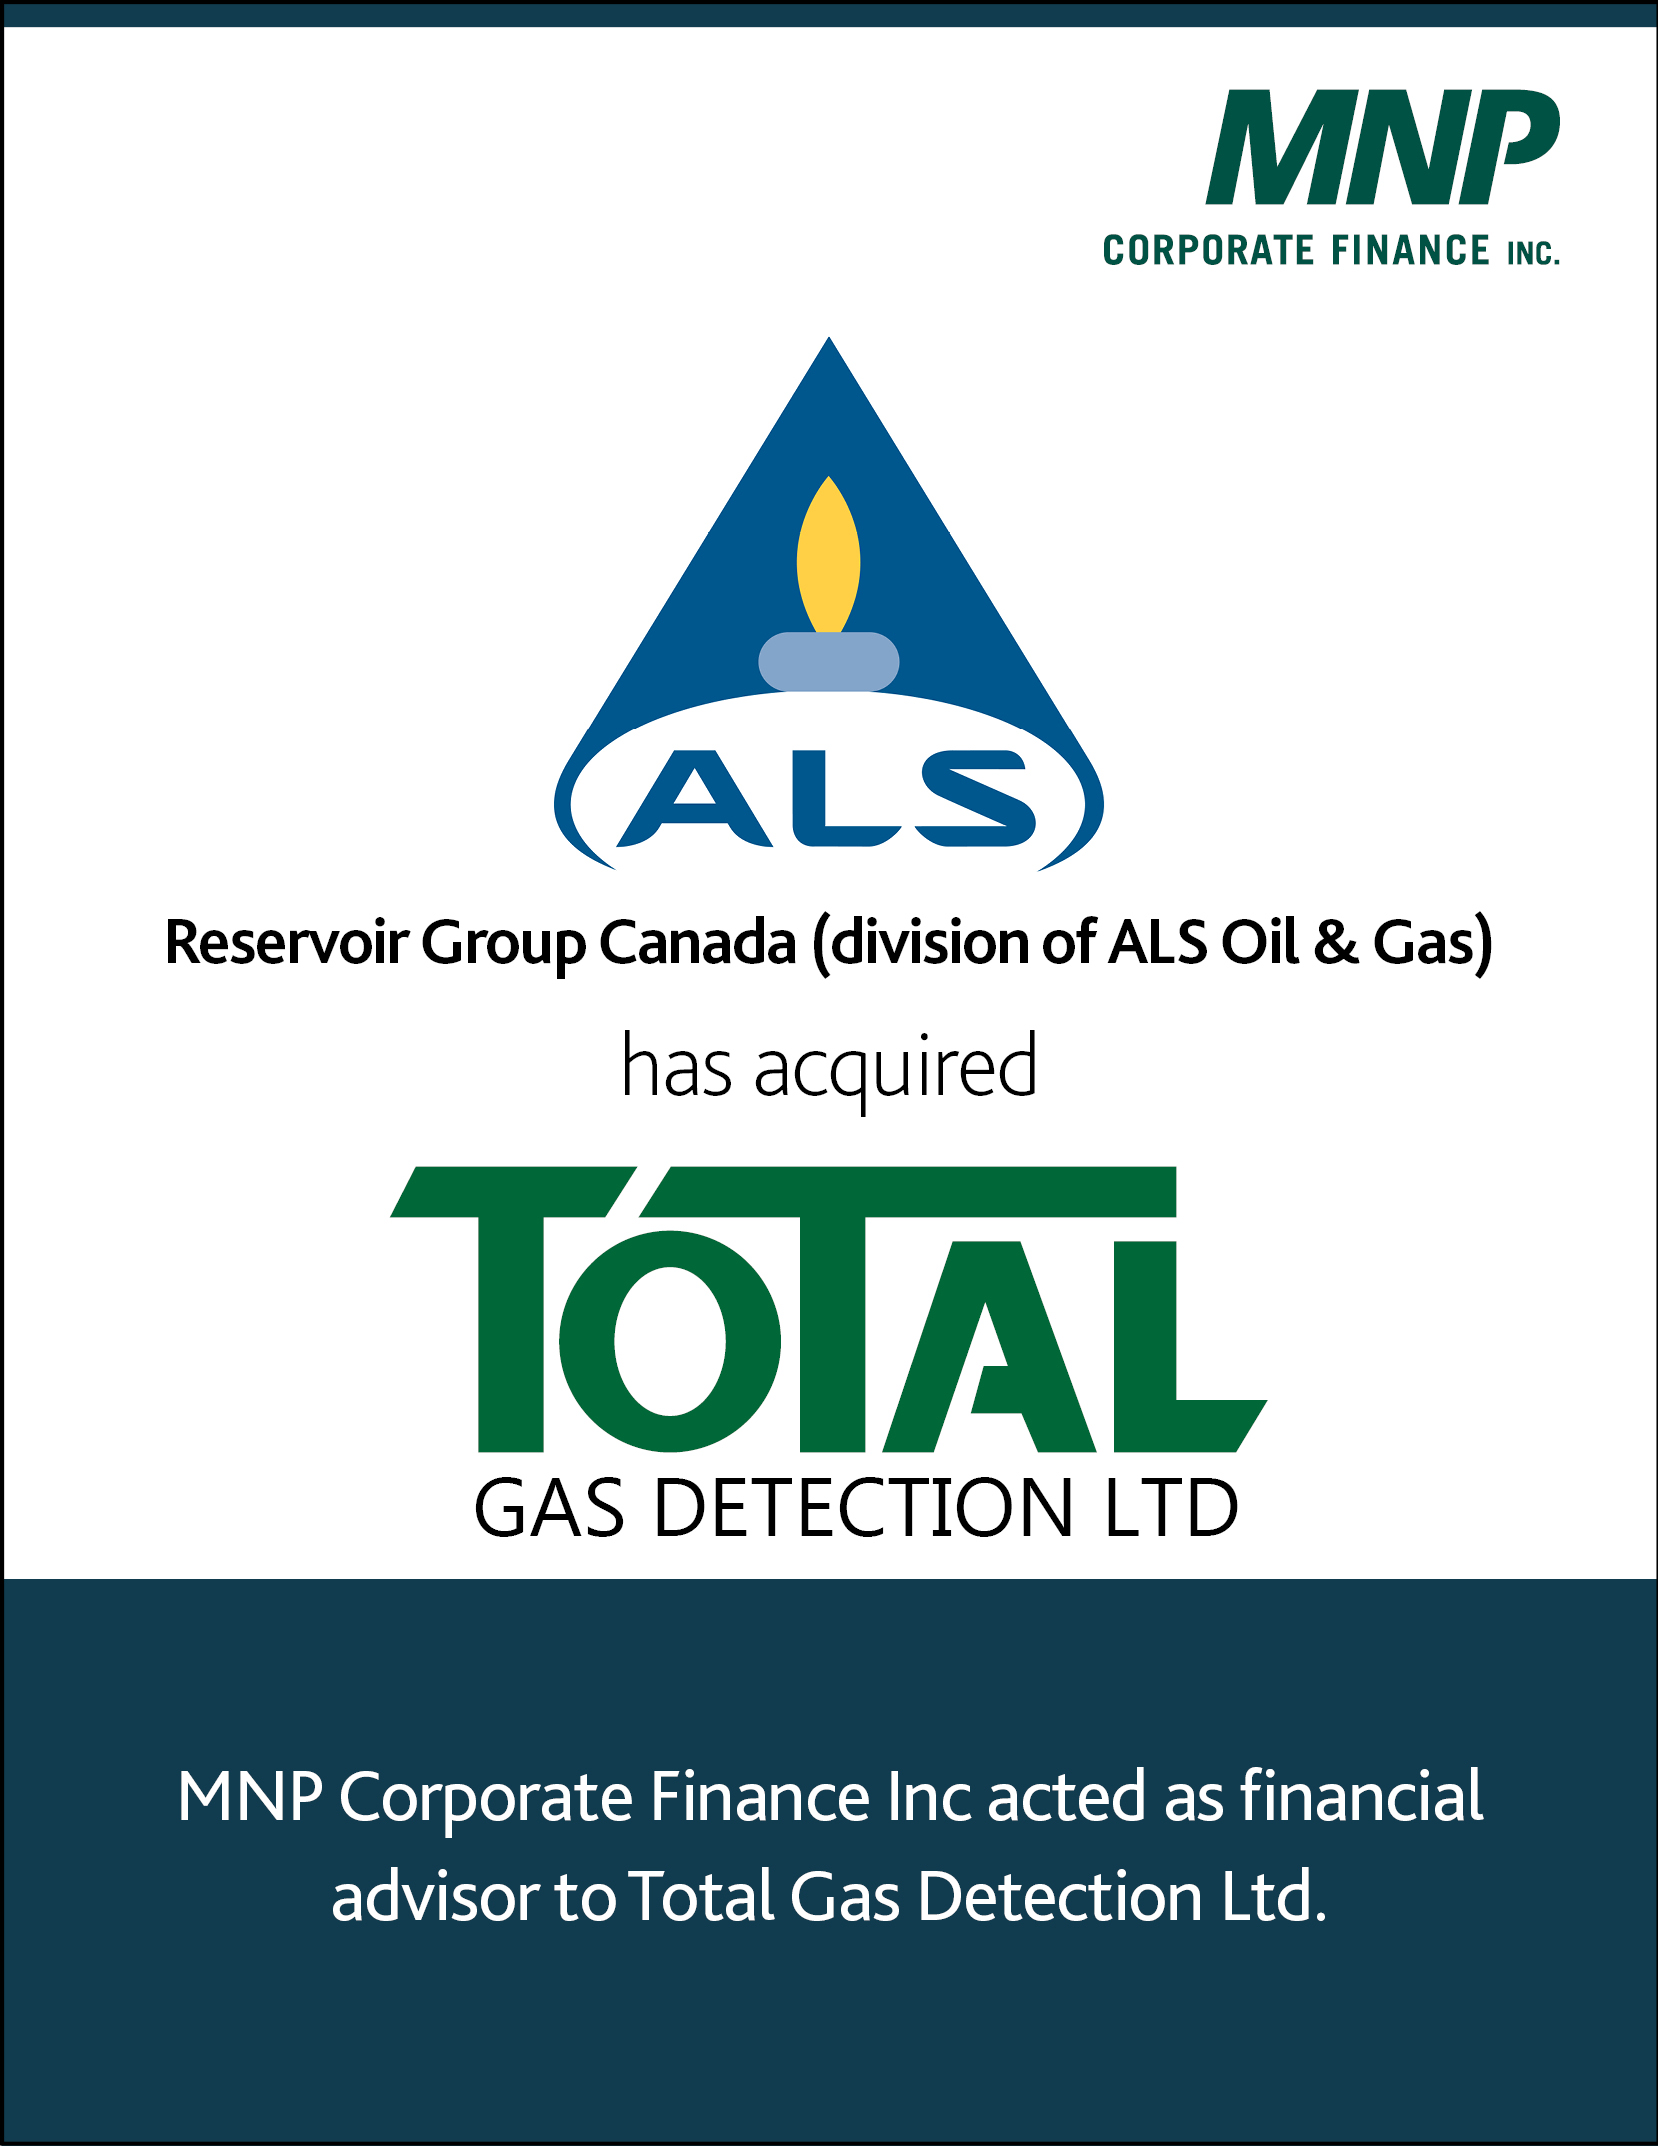 Reservoir Group Canada (division of ALS Oil & Gas) has acquired Total Gas Detection Ltd. 